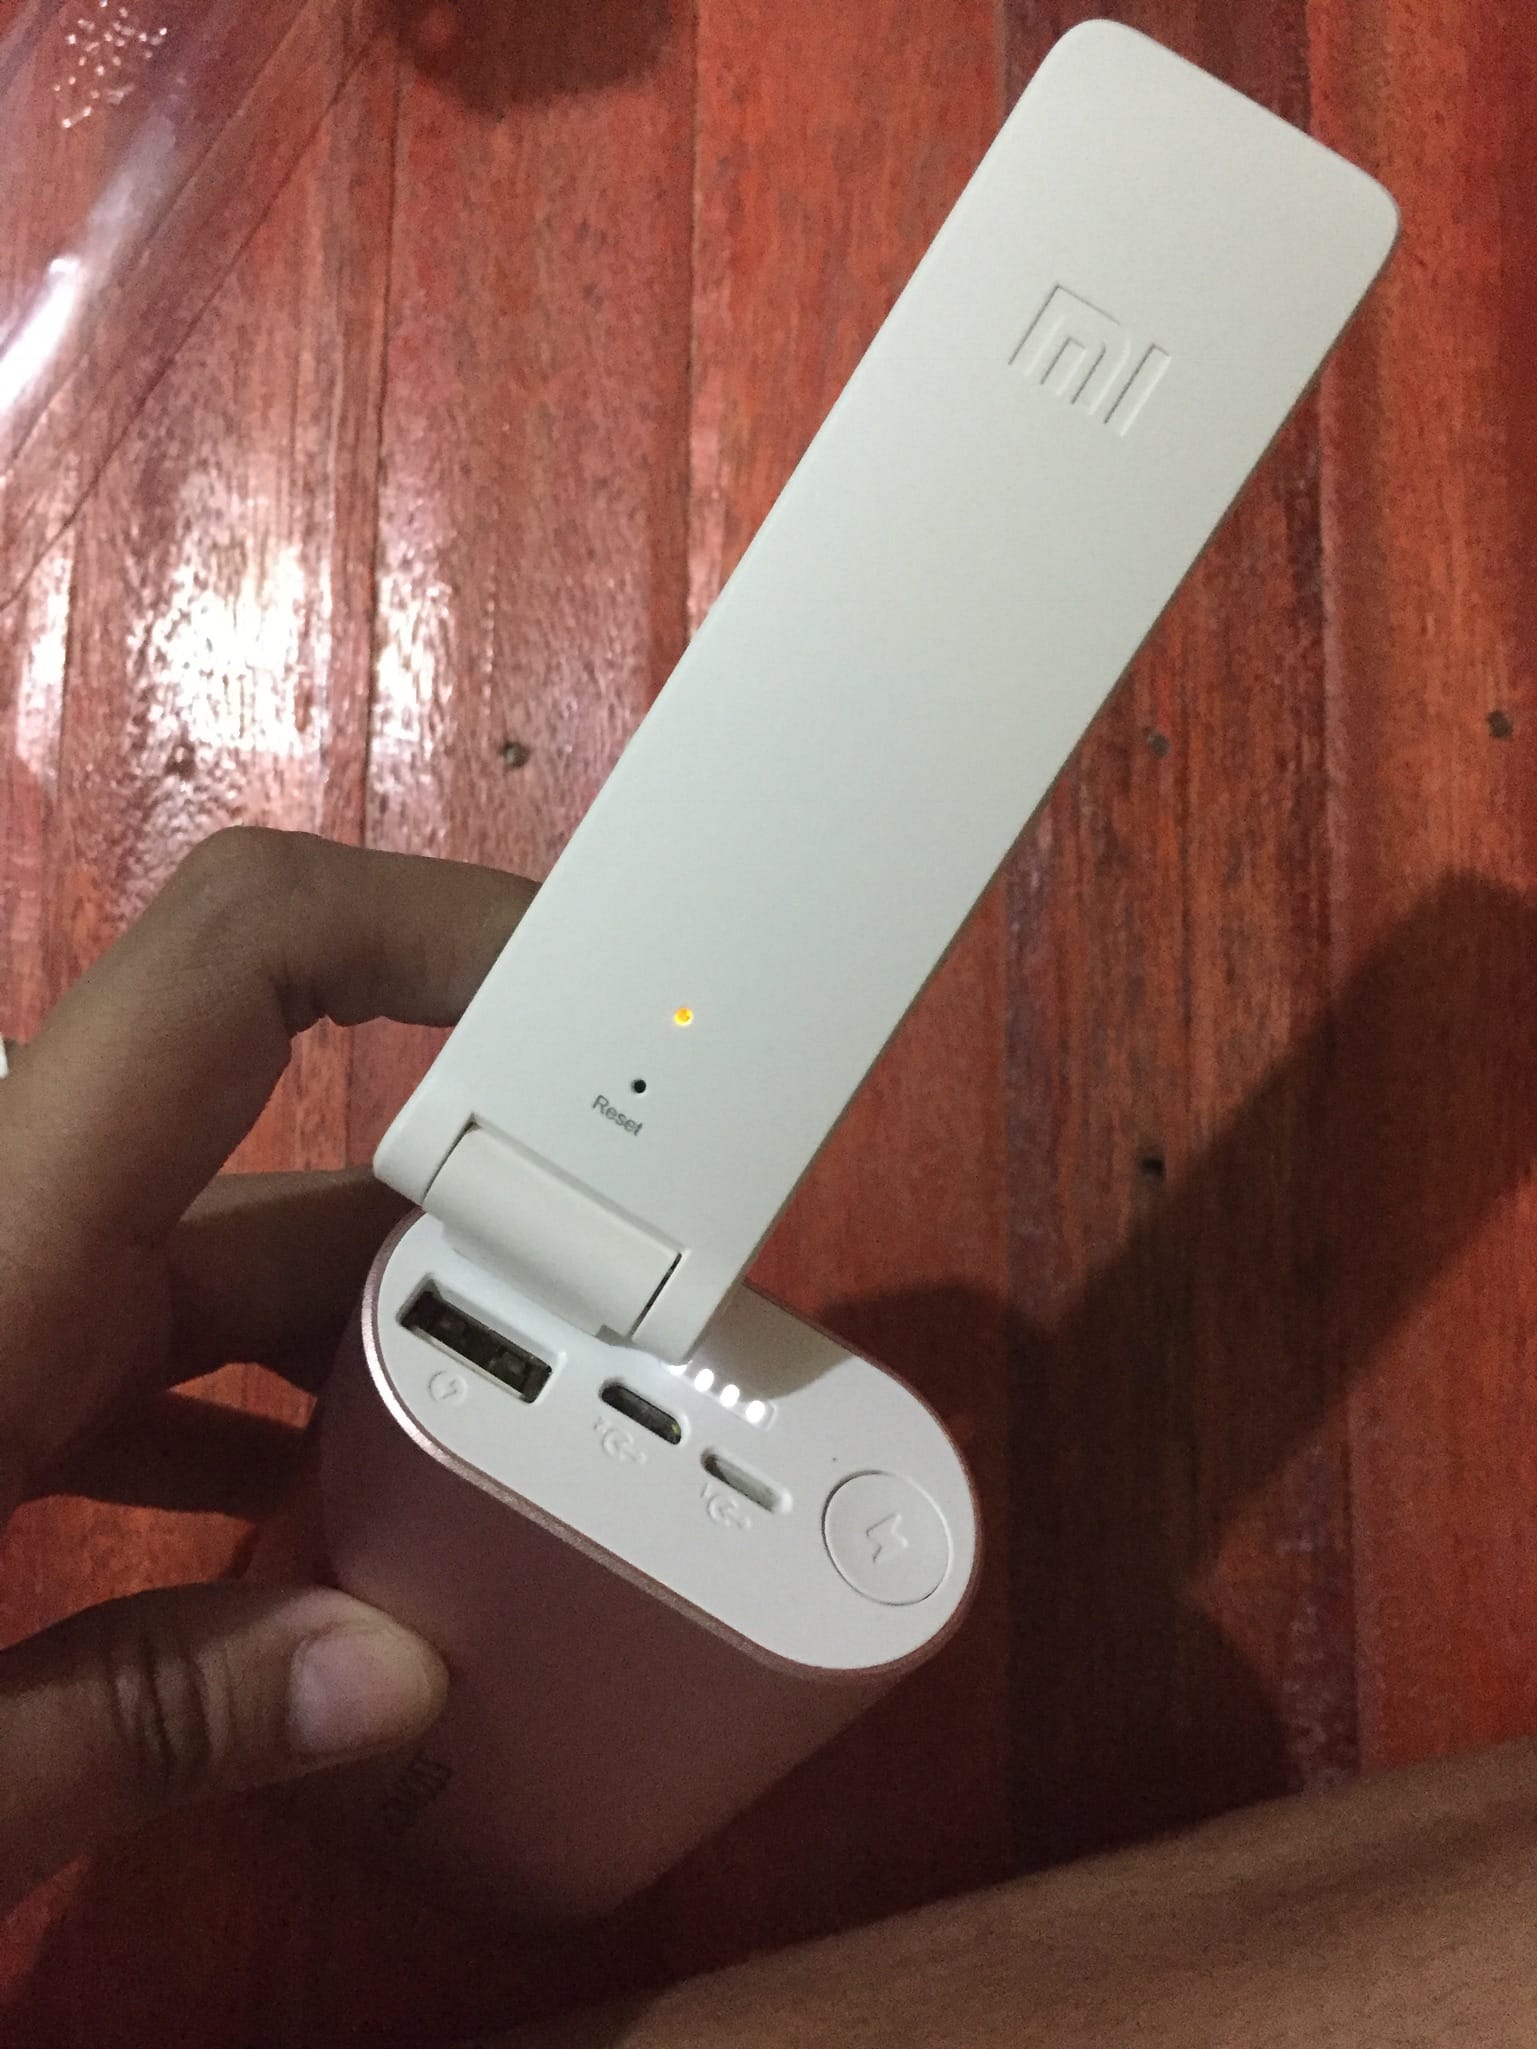 Xiaomi Mi WiFi Repeater 2 Quick Review and Set Up